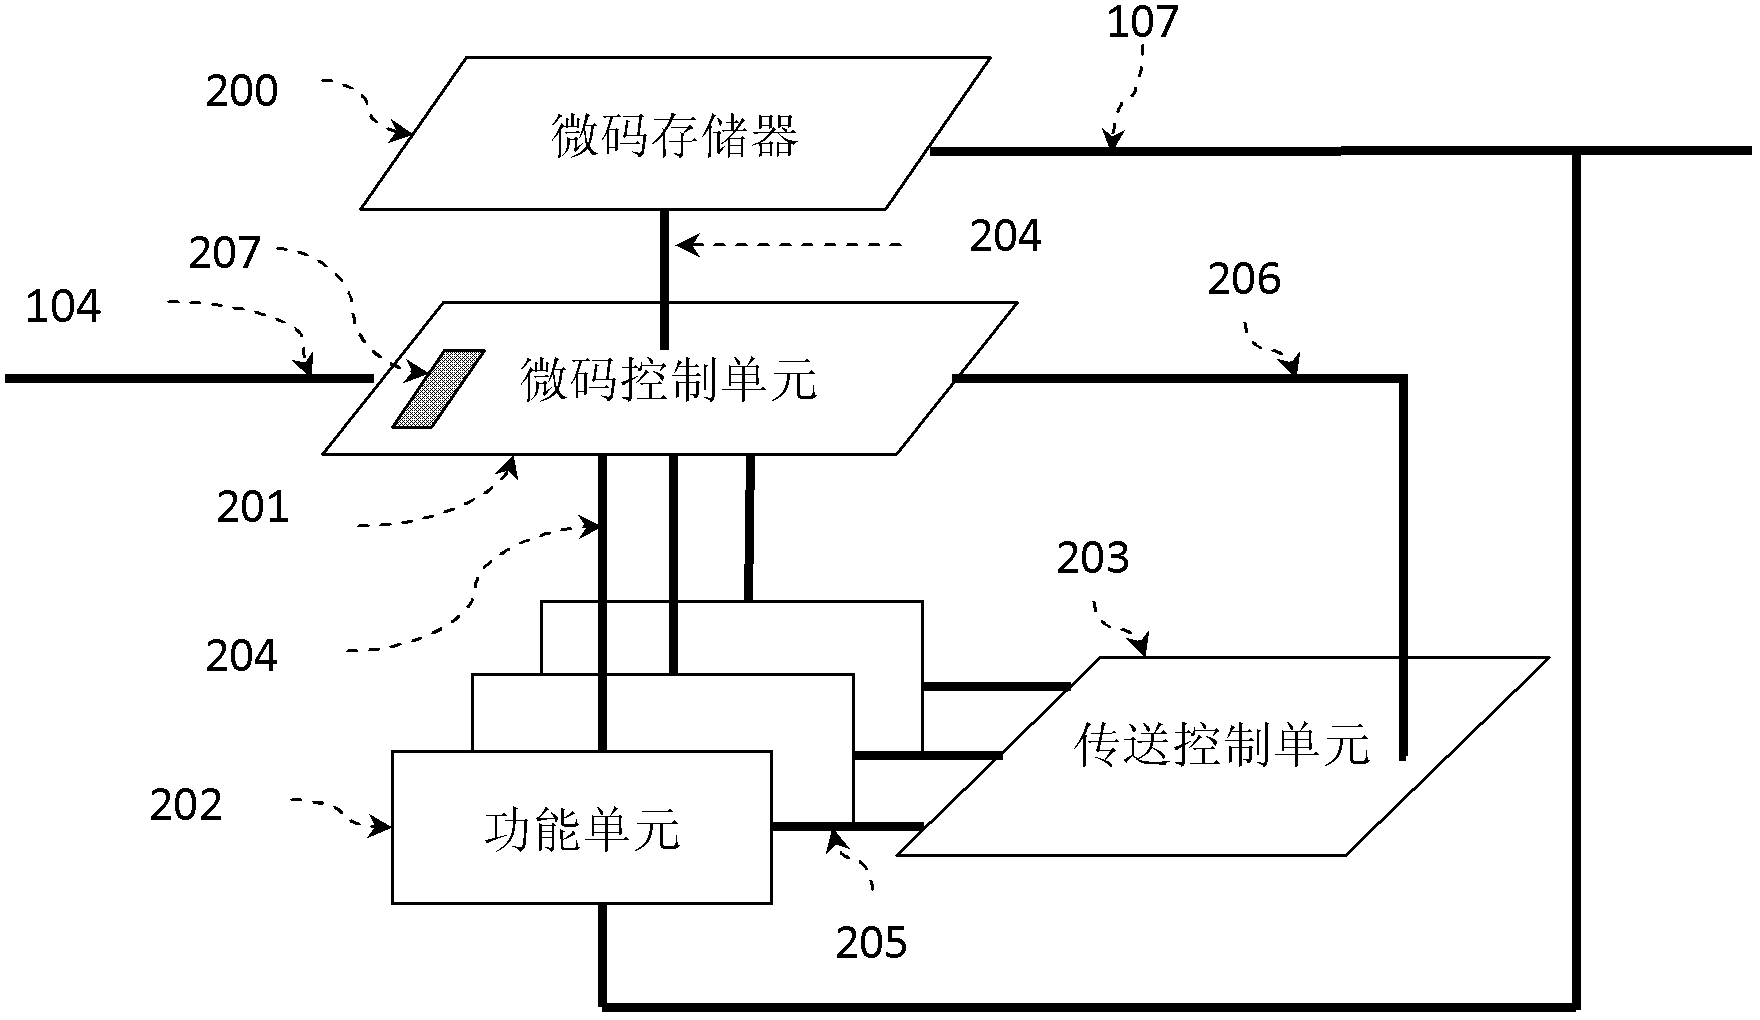 Processor with polymorphic instruction set architecture